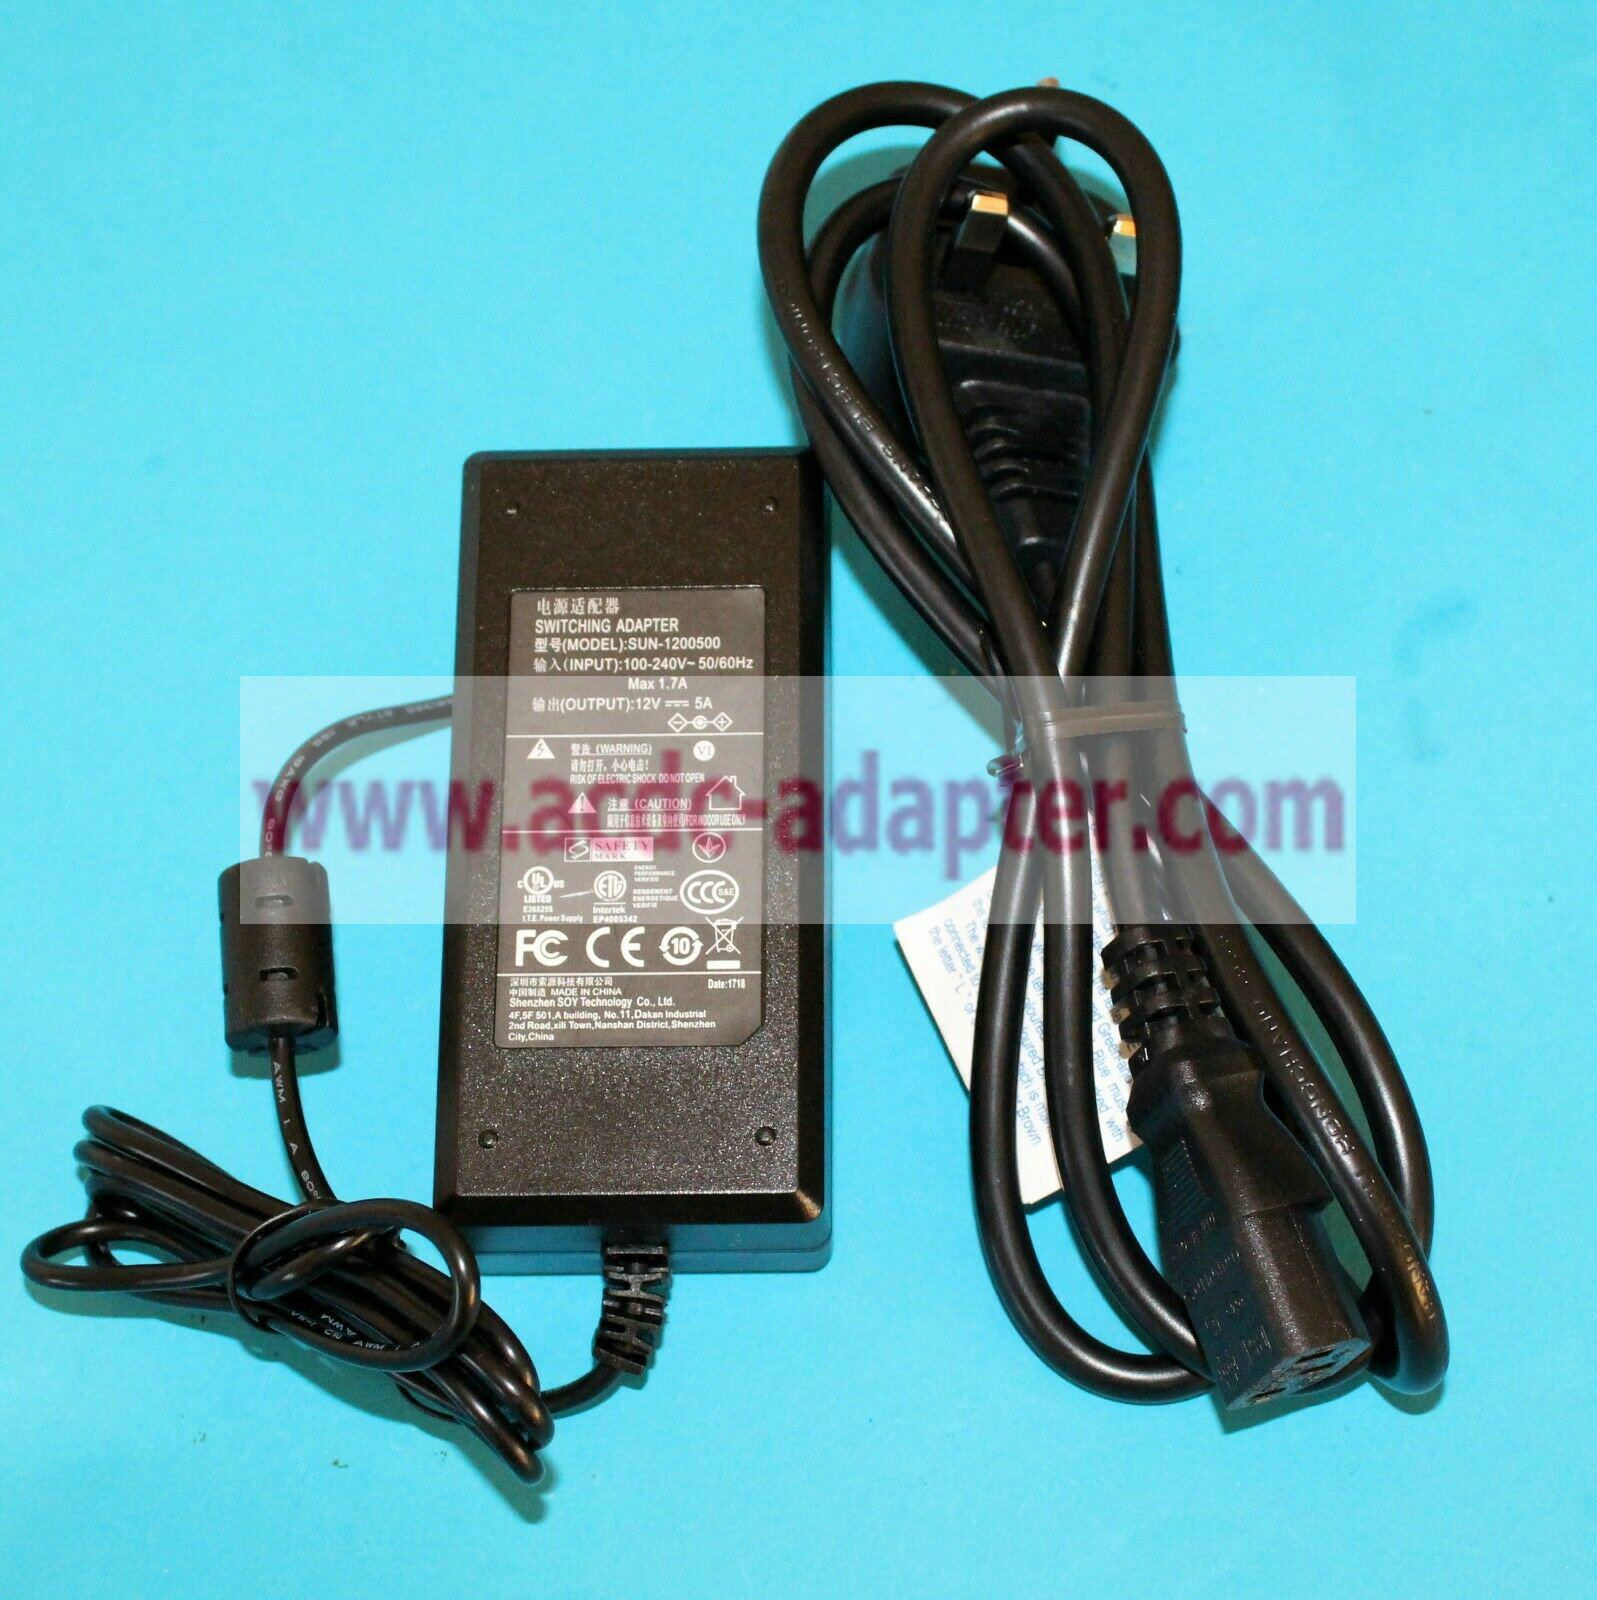 New SUN-1200500 12V 5A SWITCHING ADAPTER POWER SUPPLY